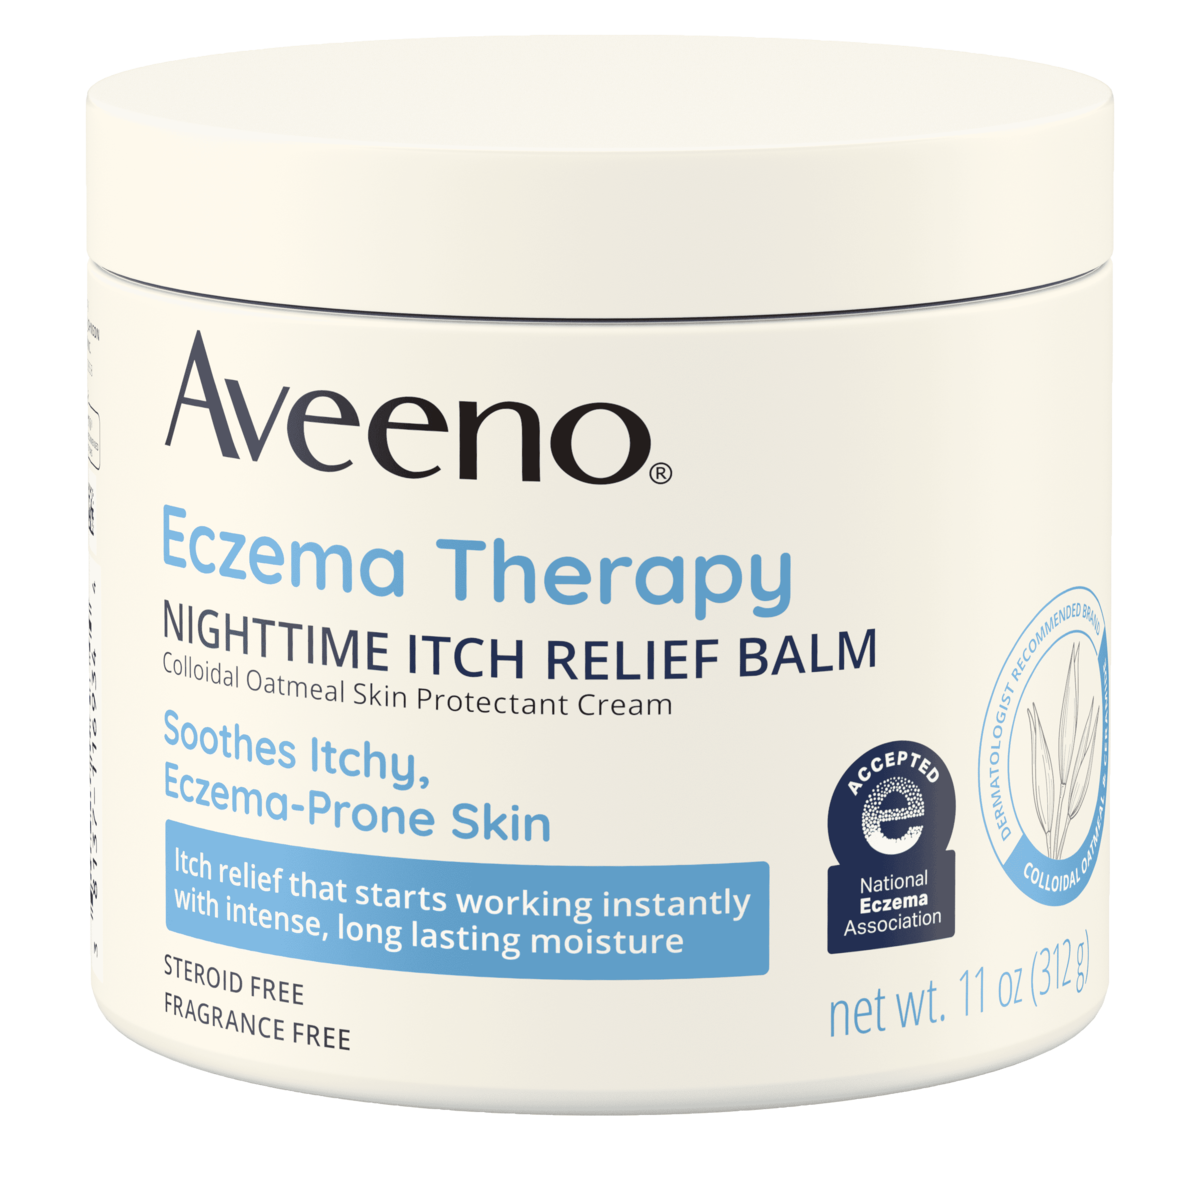 https://www.aveeno.com/sites/aveeno_us_2/files/styles/jjbos_adaptive_images_generic-desktop/public/product-images/ave_381371169344_us_eczema_therapy_itch_relief_balm_11oz_00000.png